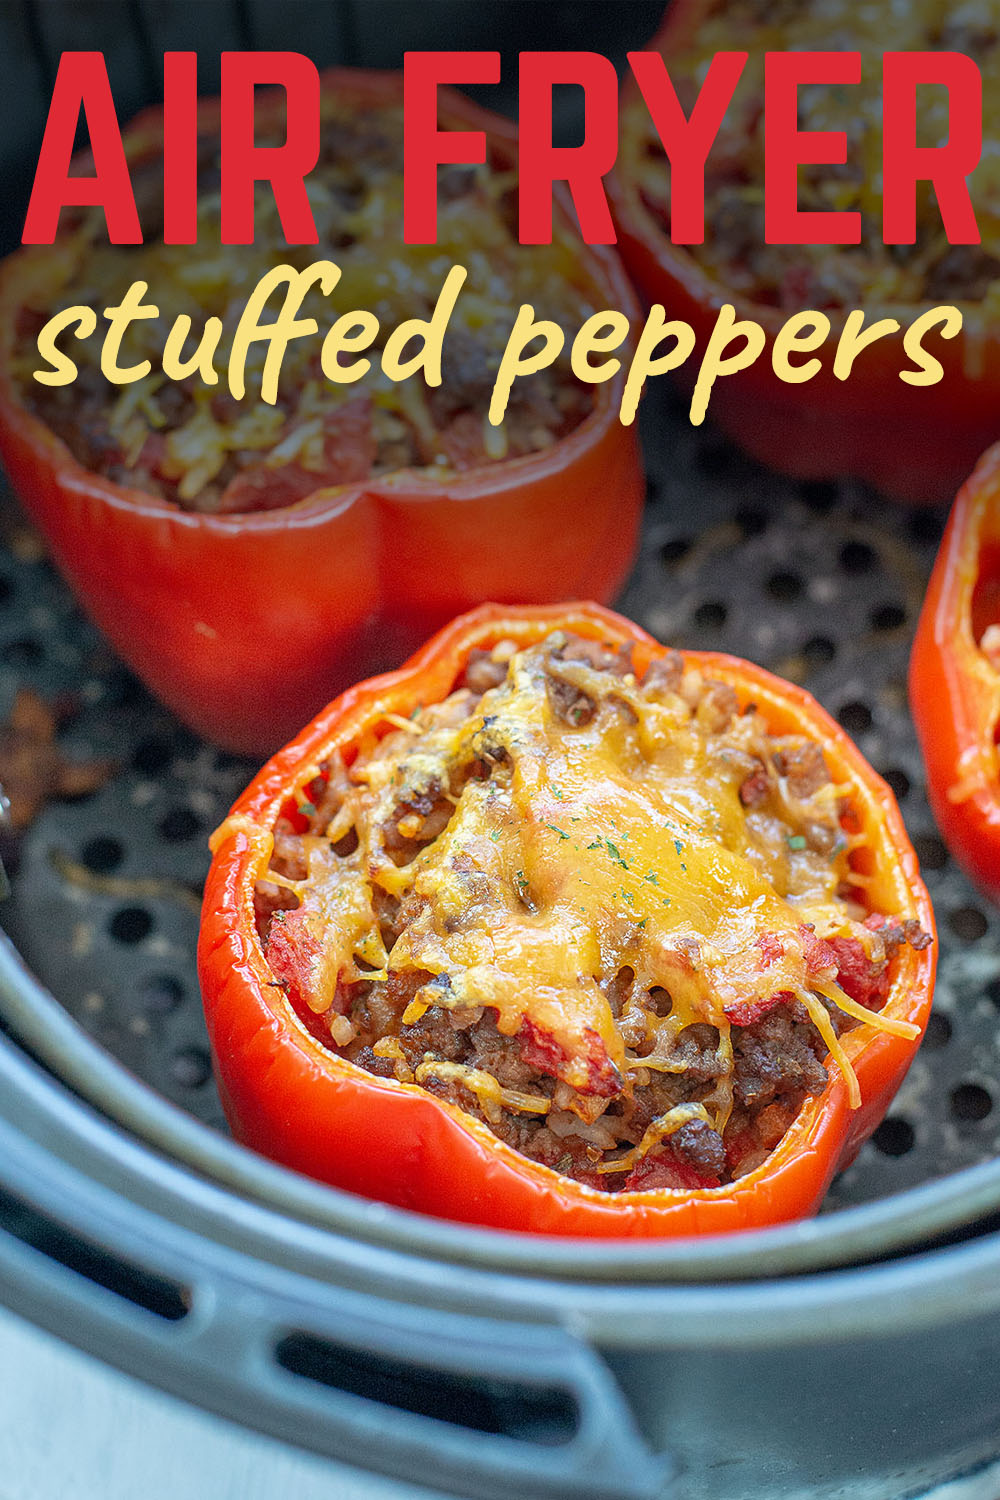 Our air fryer stuffed peppers cook in about 15 minutes in the air fryer! So quick and easy - just like mom used to make!